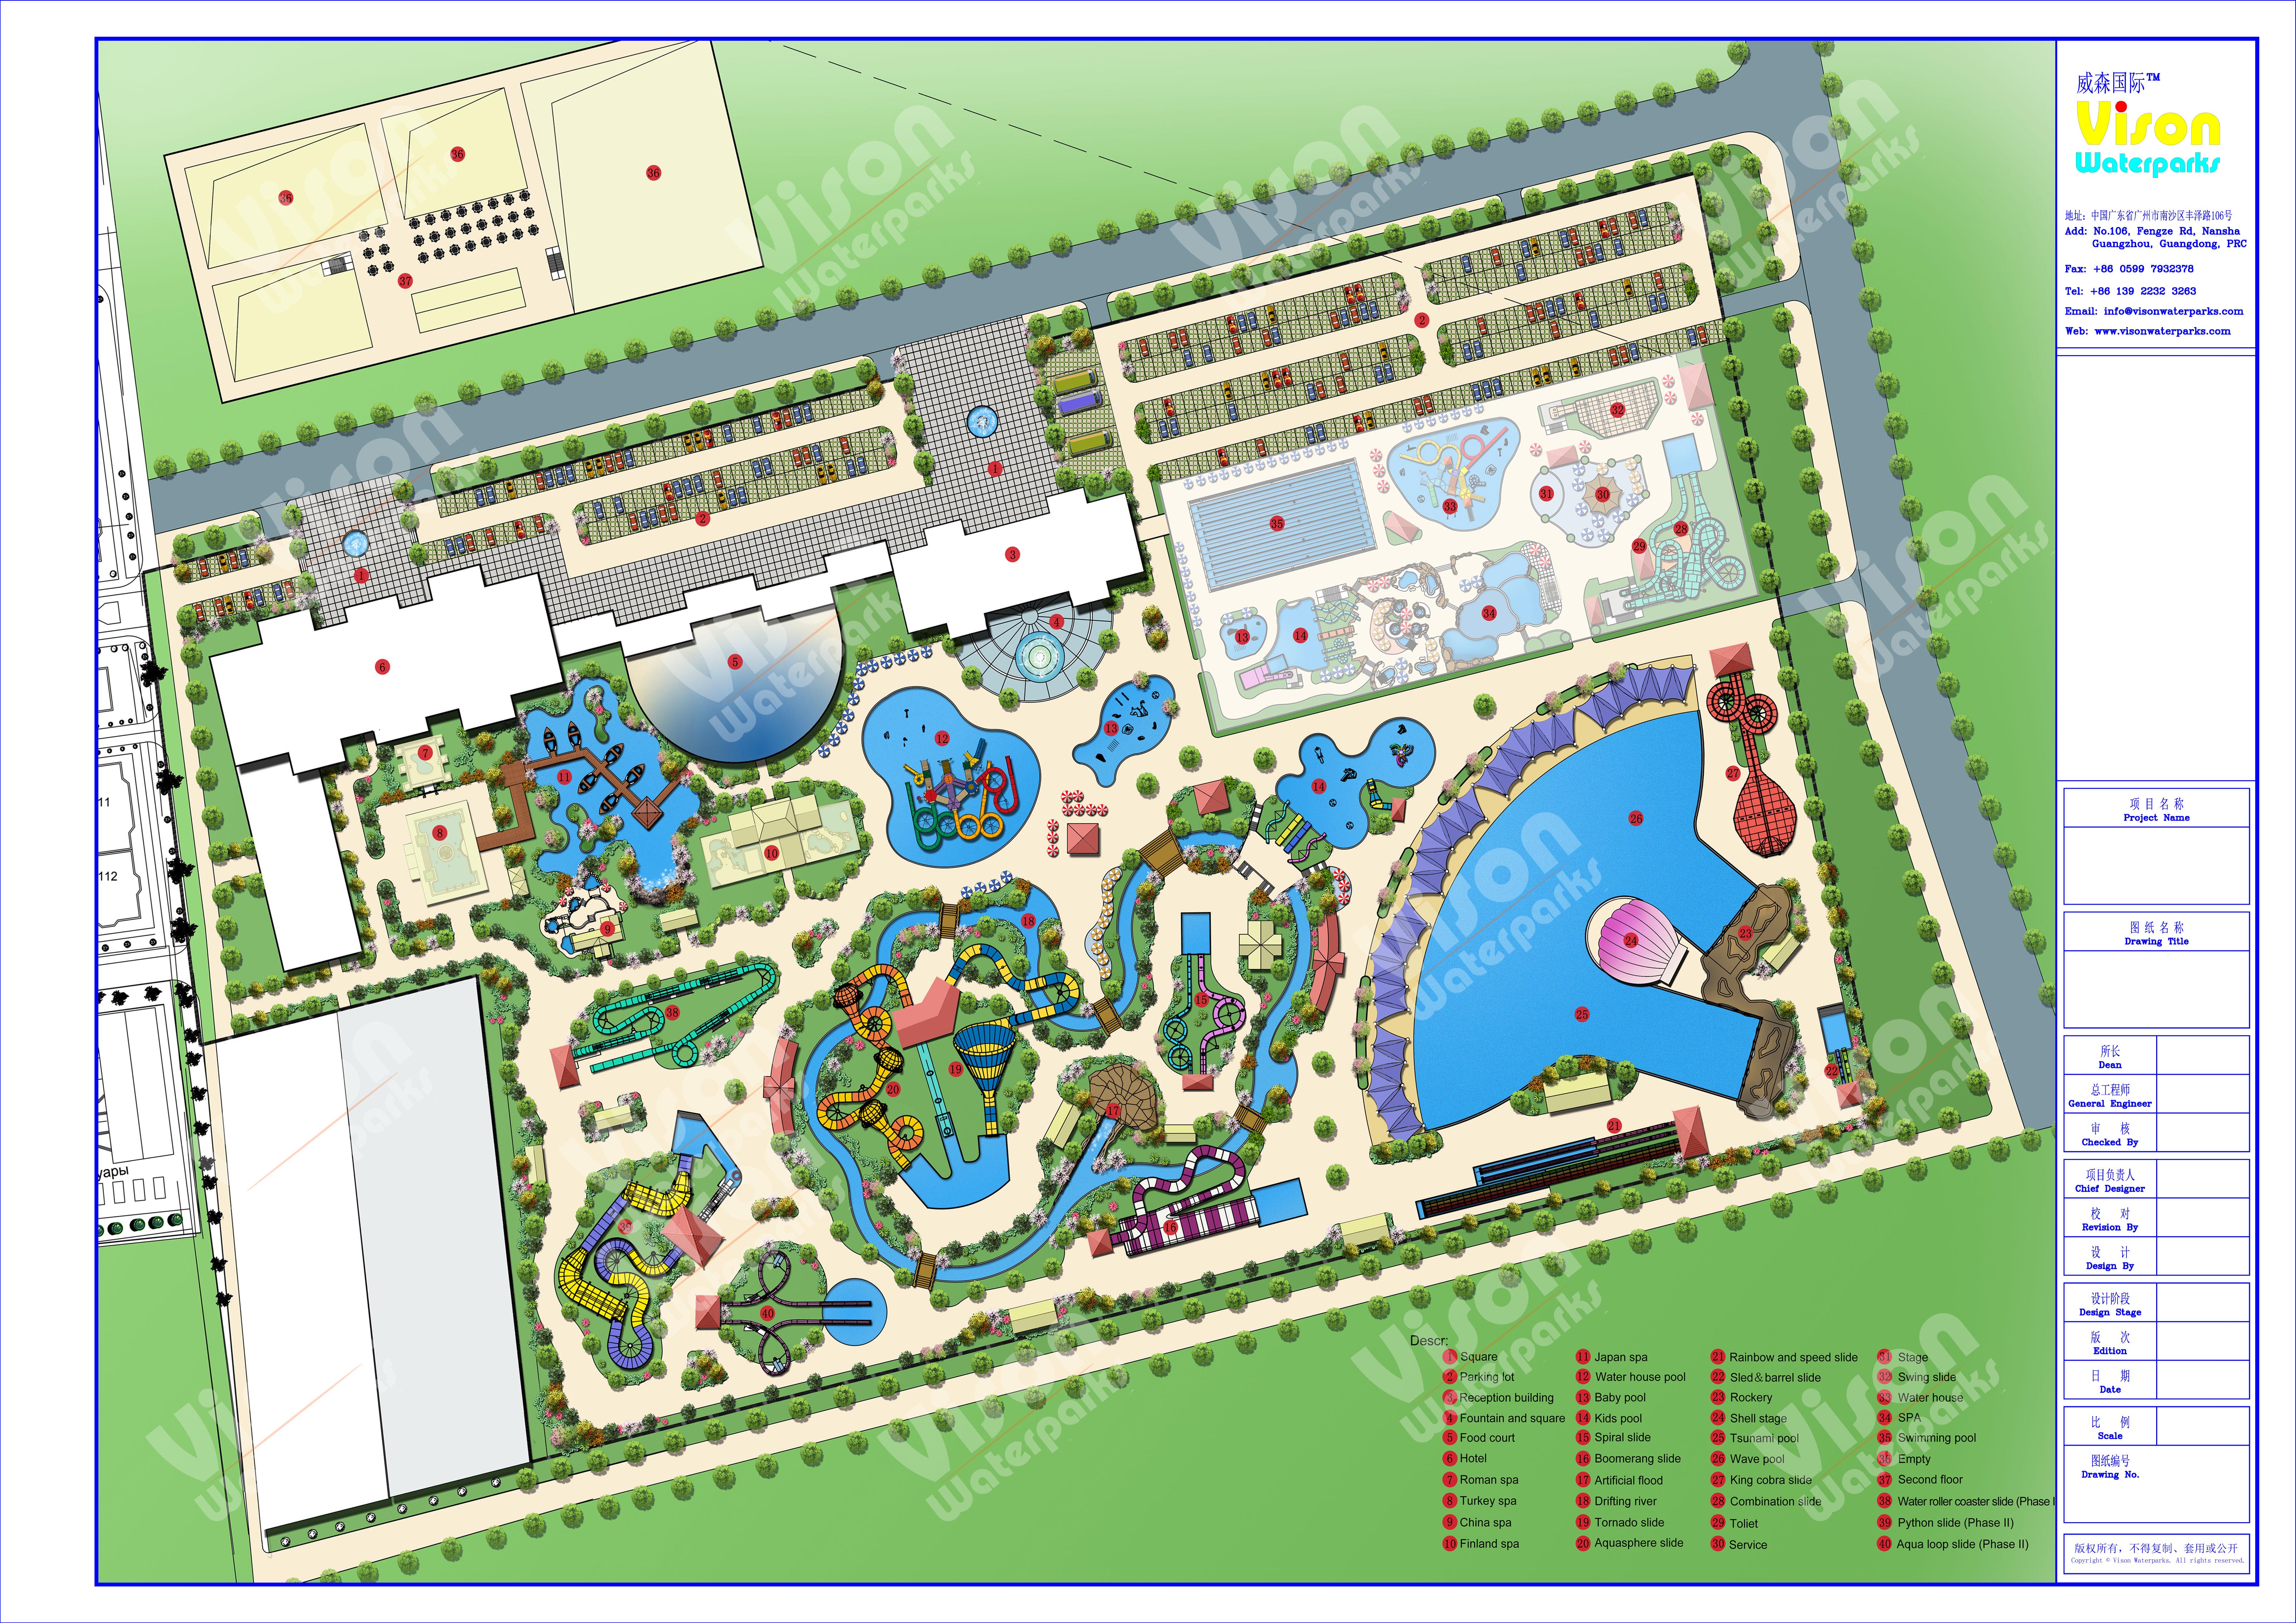 How to make a advantaged water parks plan and design?